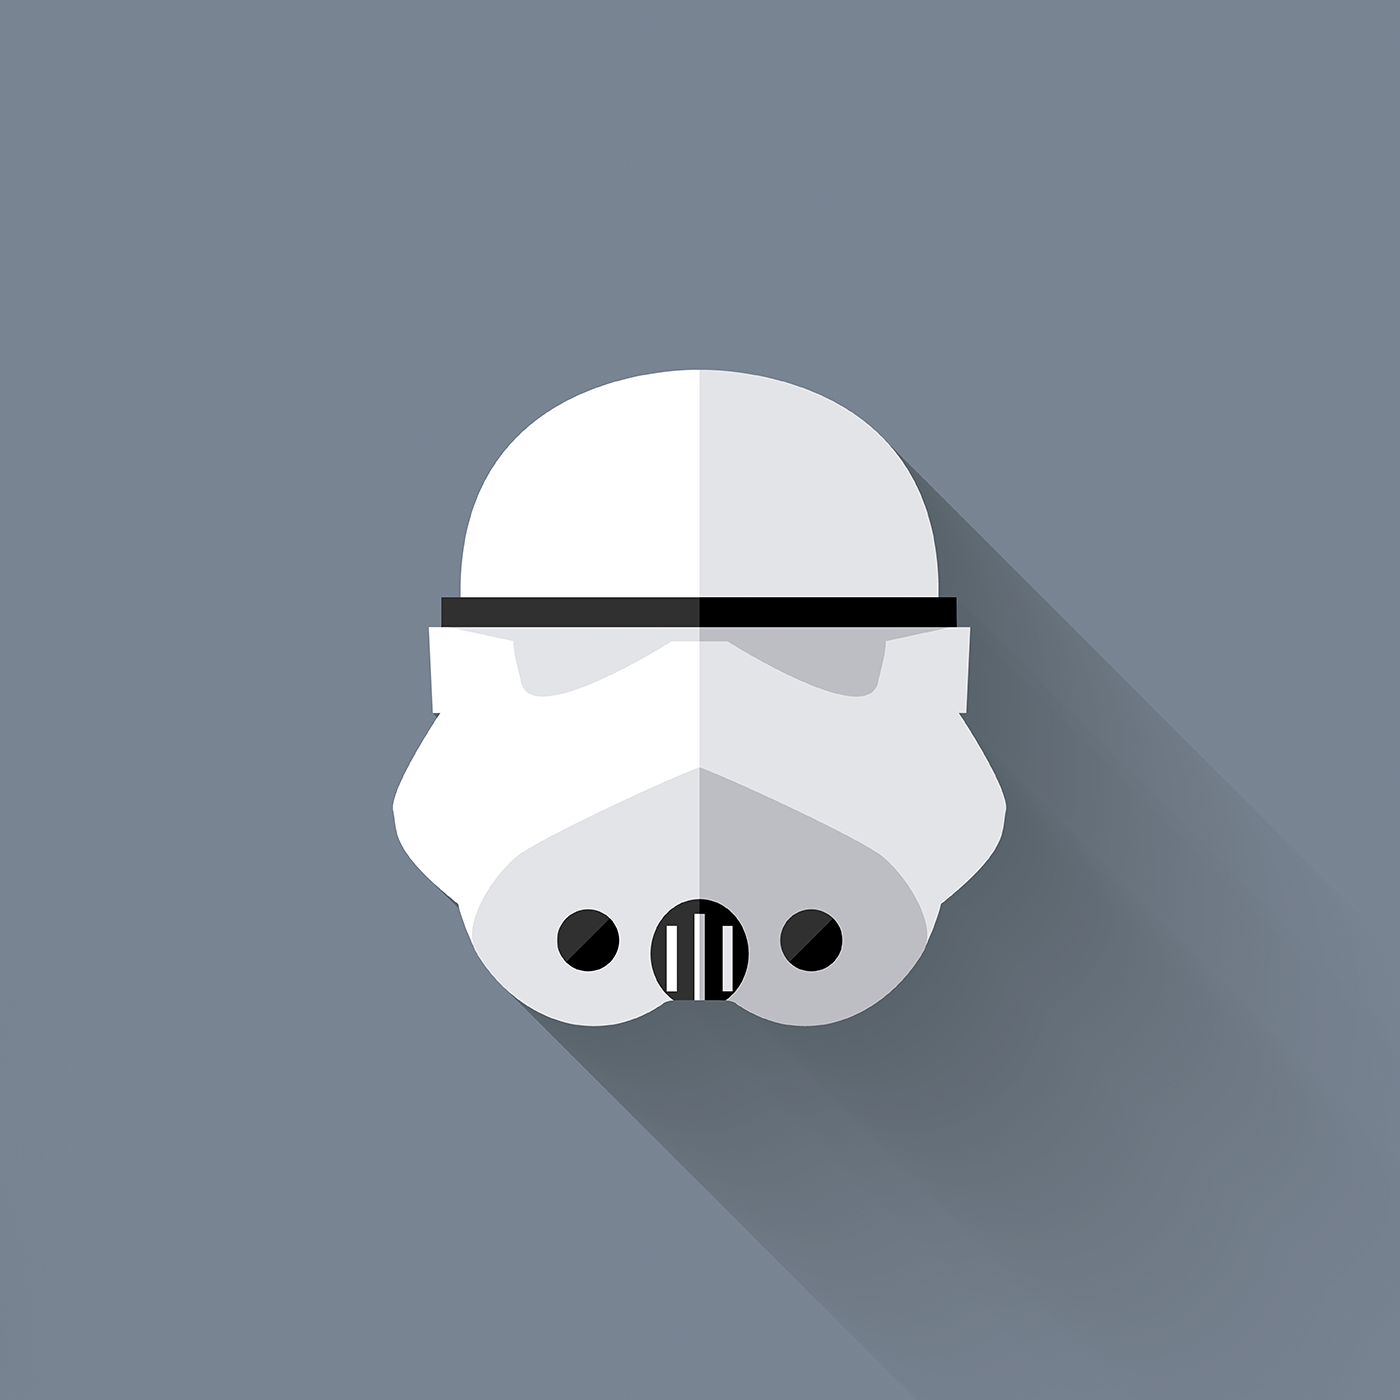 Adobe Portfolio Starwars flat design Long shadow design icons darth vader may the force Be with you flat icons creativeflip face icons characters iconic